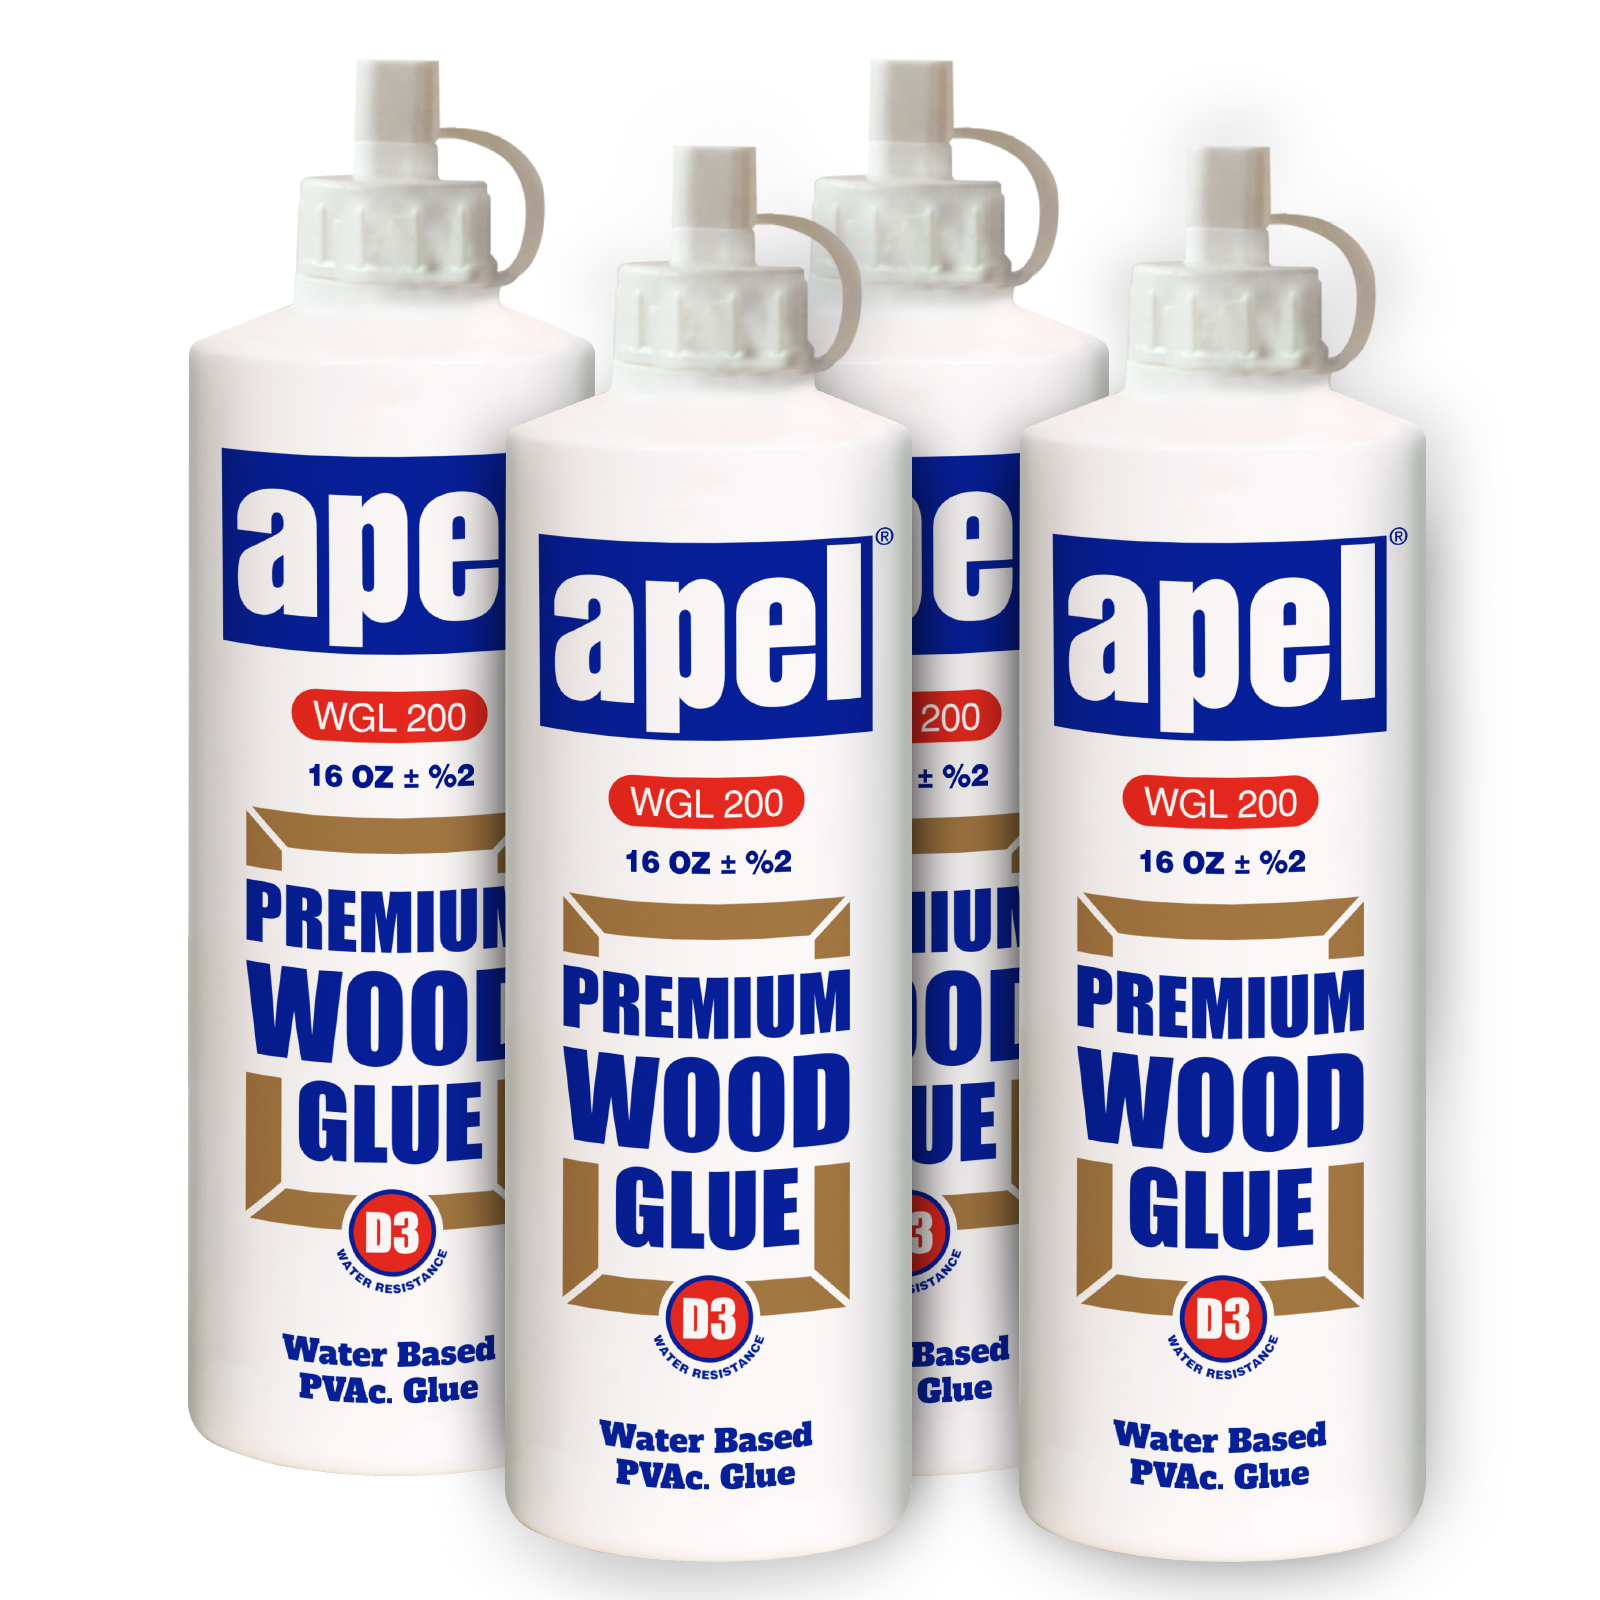 Wood Glue For Woodworking And Hobbies, Extra Strength For Crafts, 16 oz./1  pound, Water Based Clear PVA Glue For Interior & Exterior, Low Viscosity (4  Pack) 